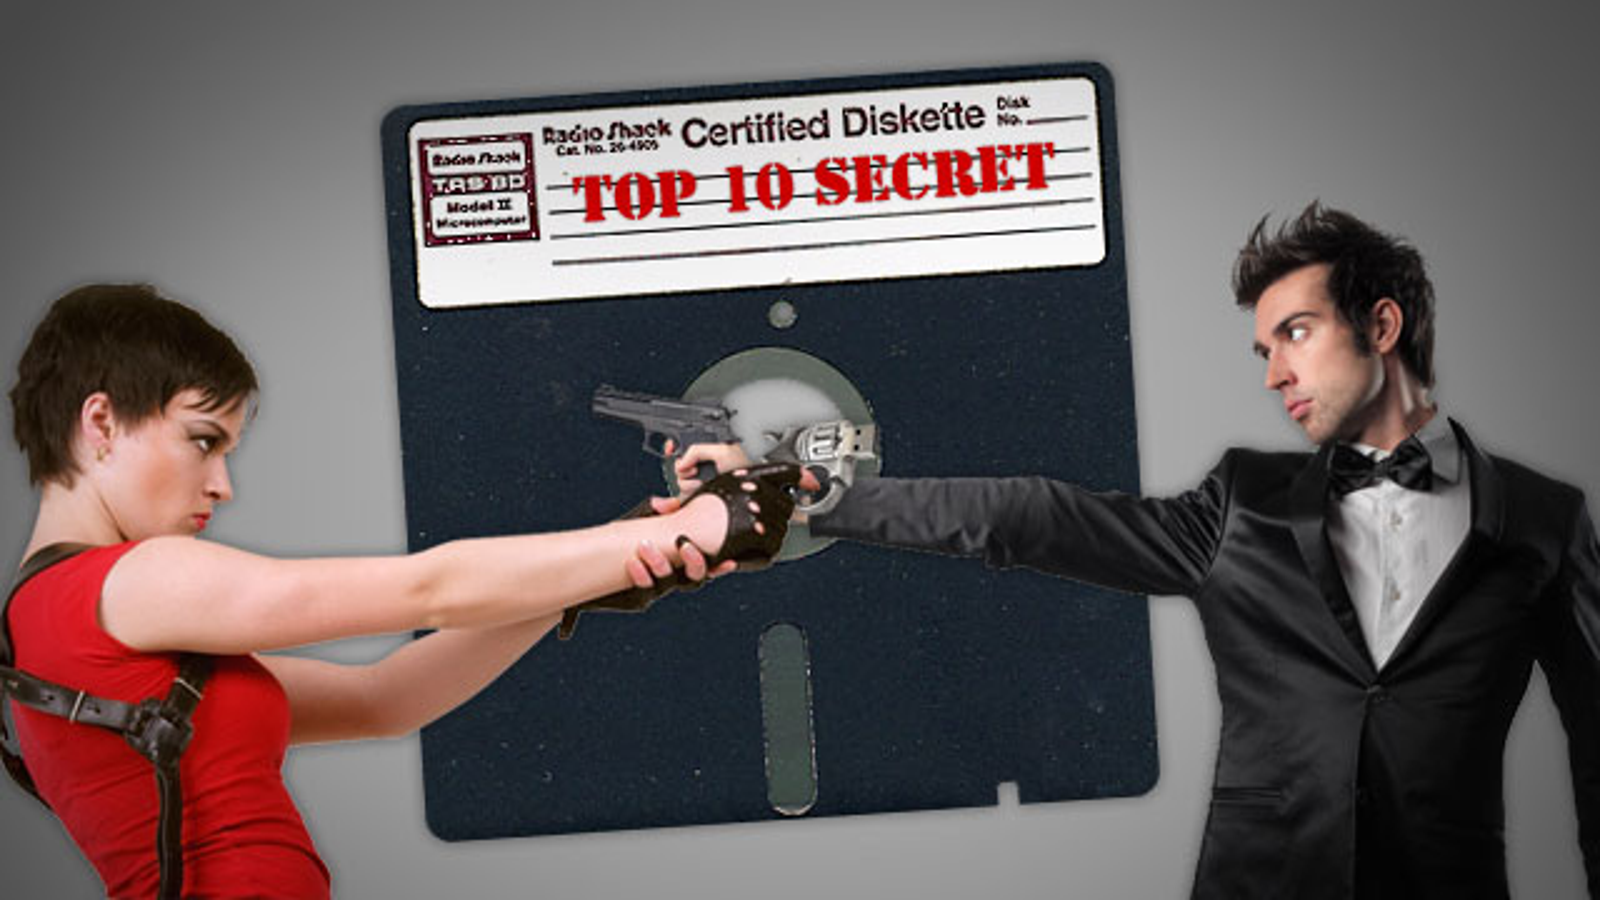 how to be a spy agent